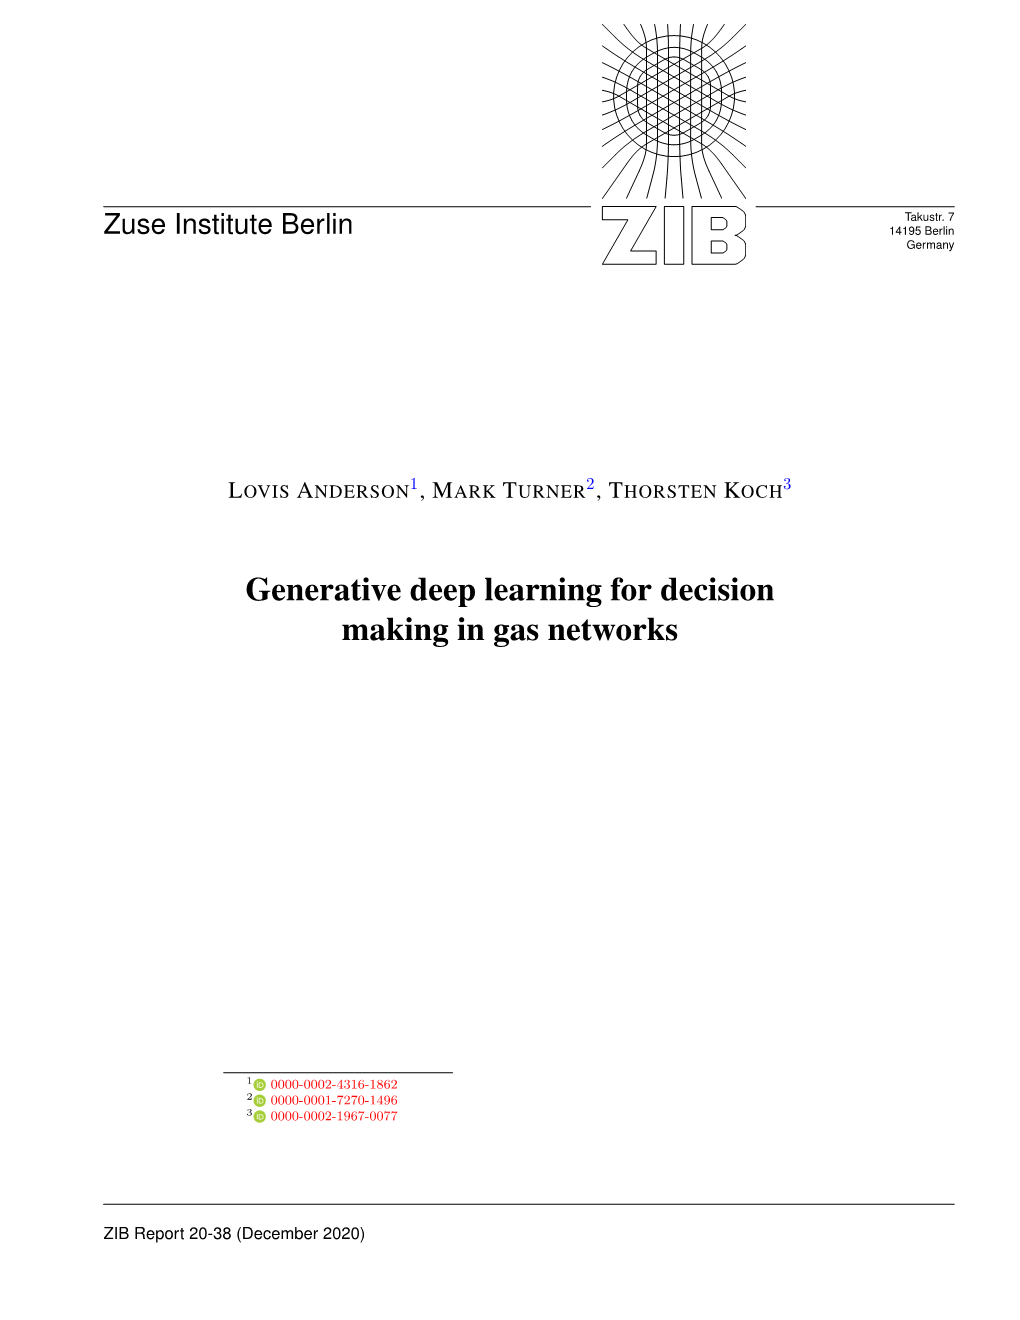 Generative Deep Learning for Decision Making in Gas Networks